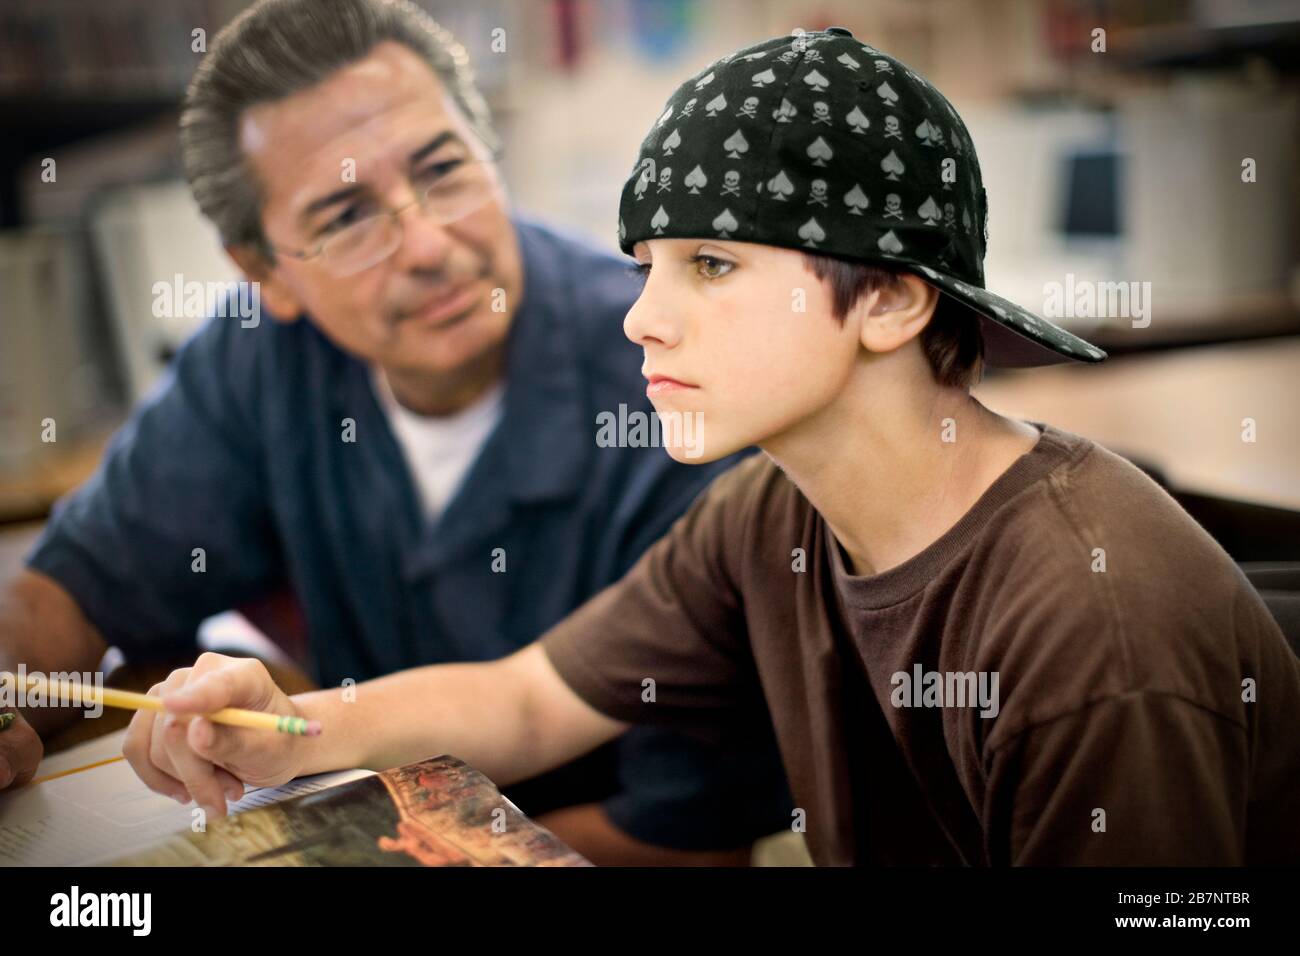 Teenage boy sitting in class with a mature adult male teacher. Stock Photo